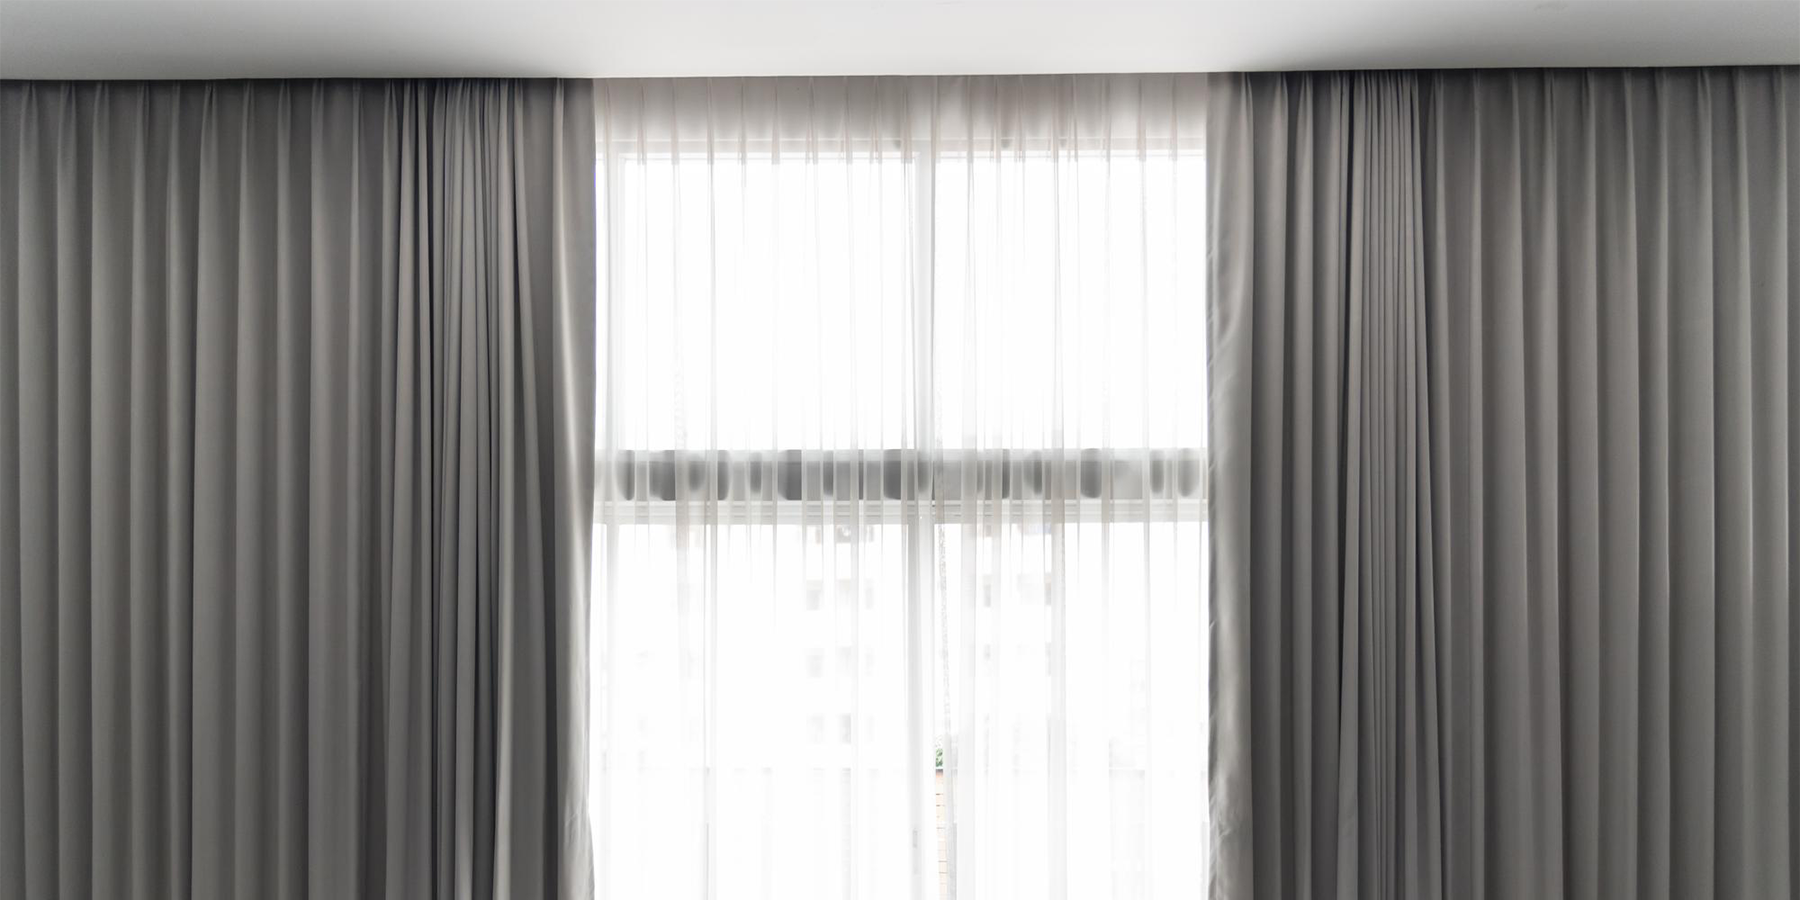 Curtains image